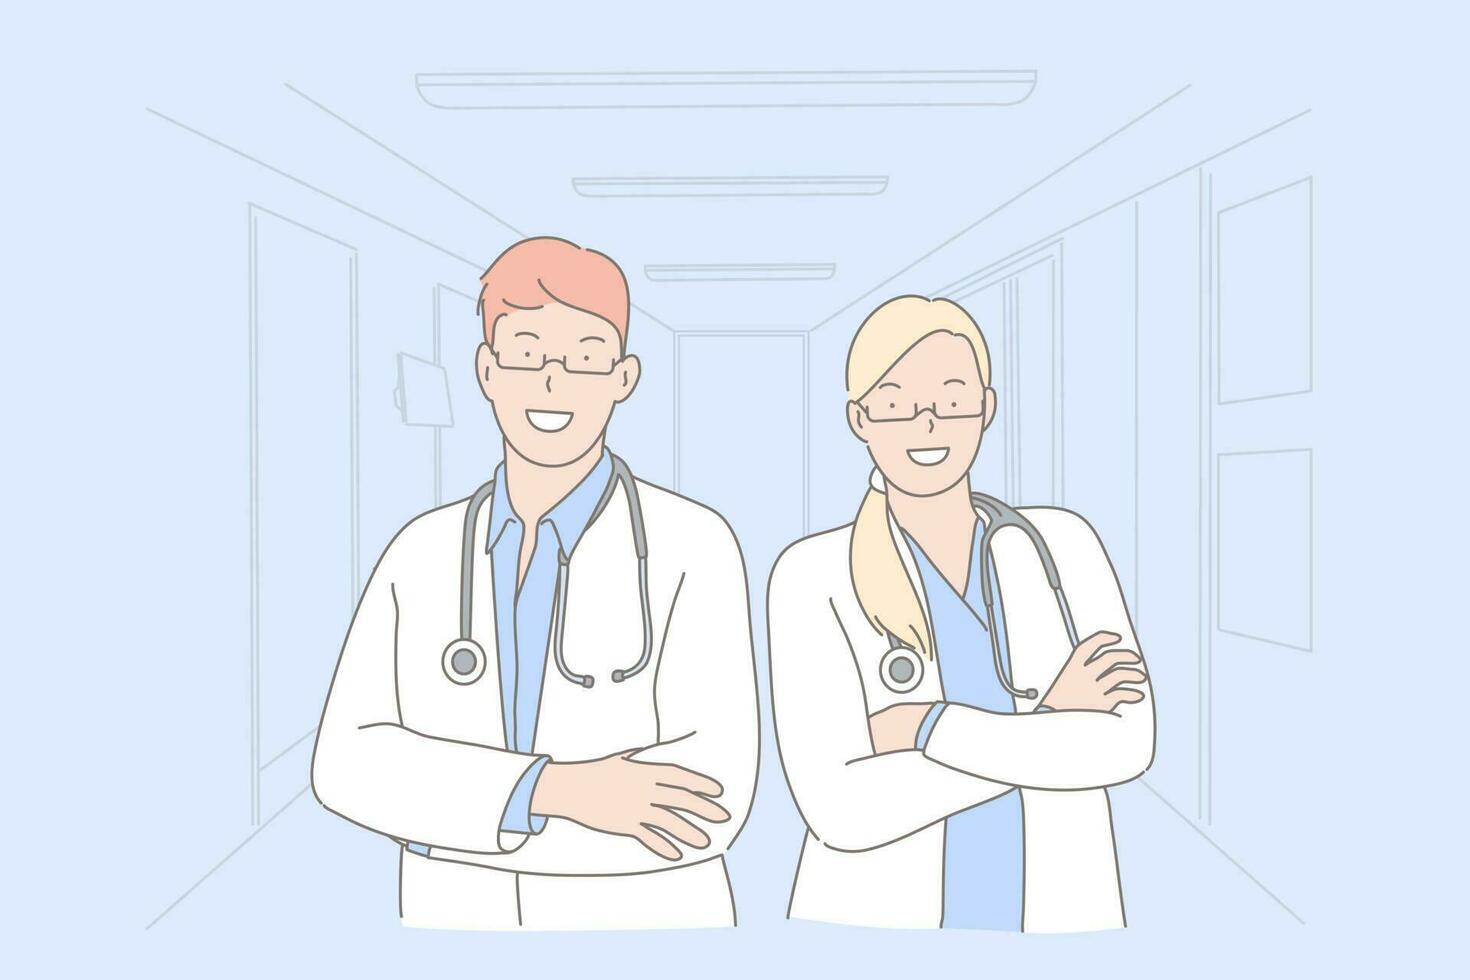 Doctors, medical workers, hospital staff concept. General practitioners wearing white coats. Smiling therapists with stethoscopes. Healthcare industry personnel. Simple flat vector